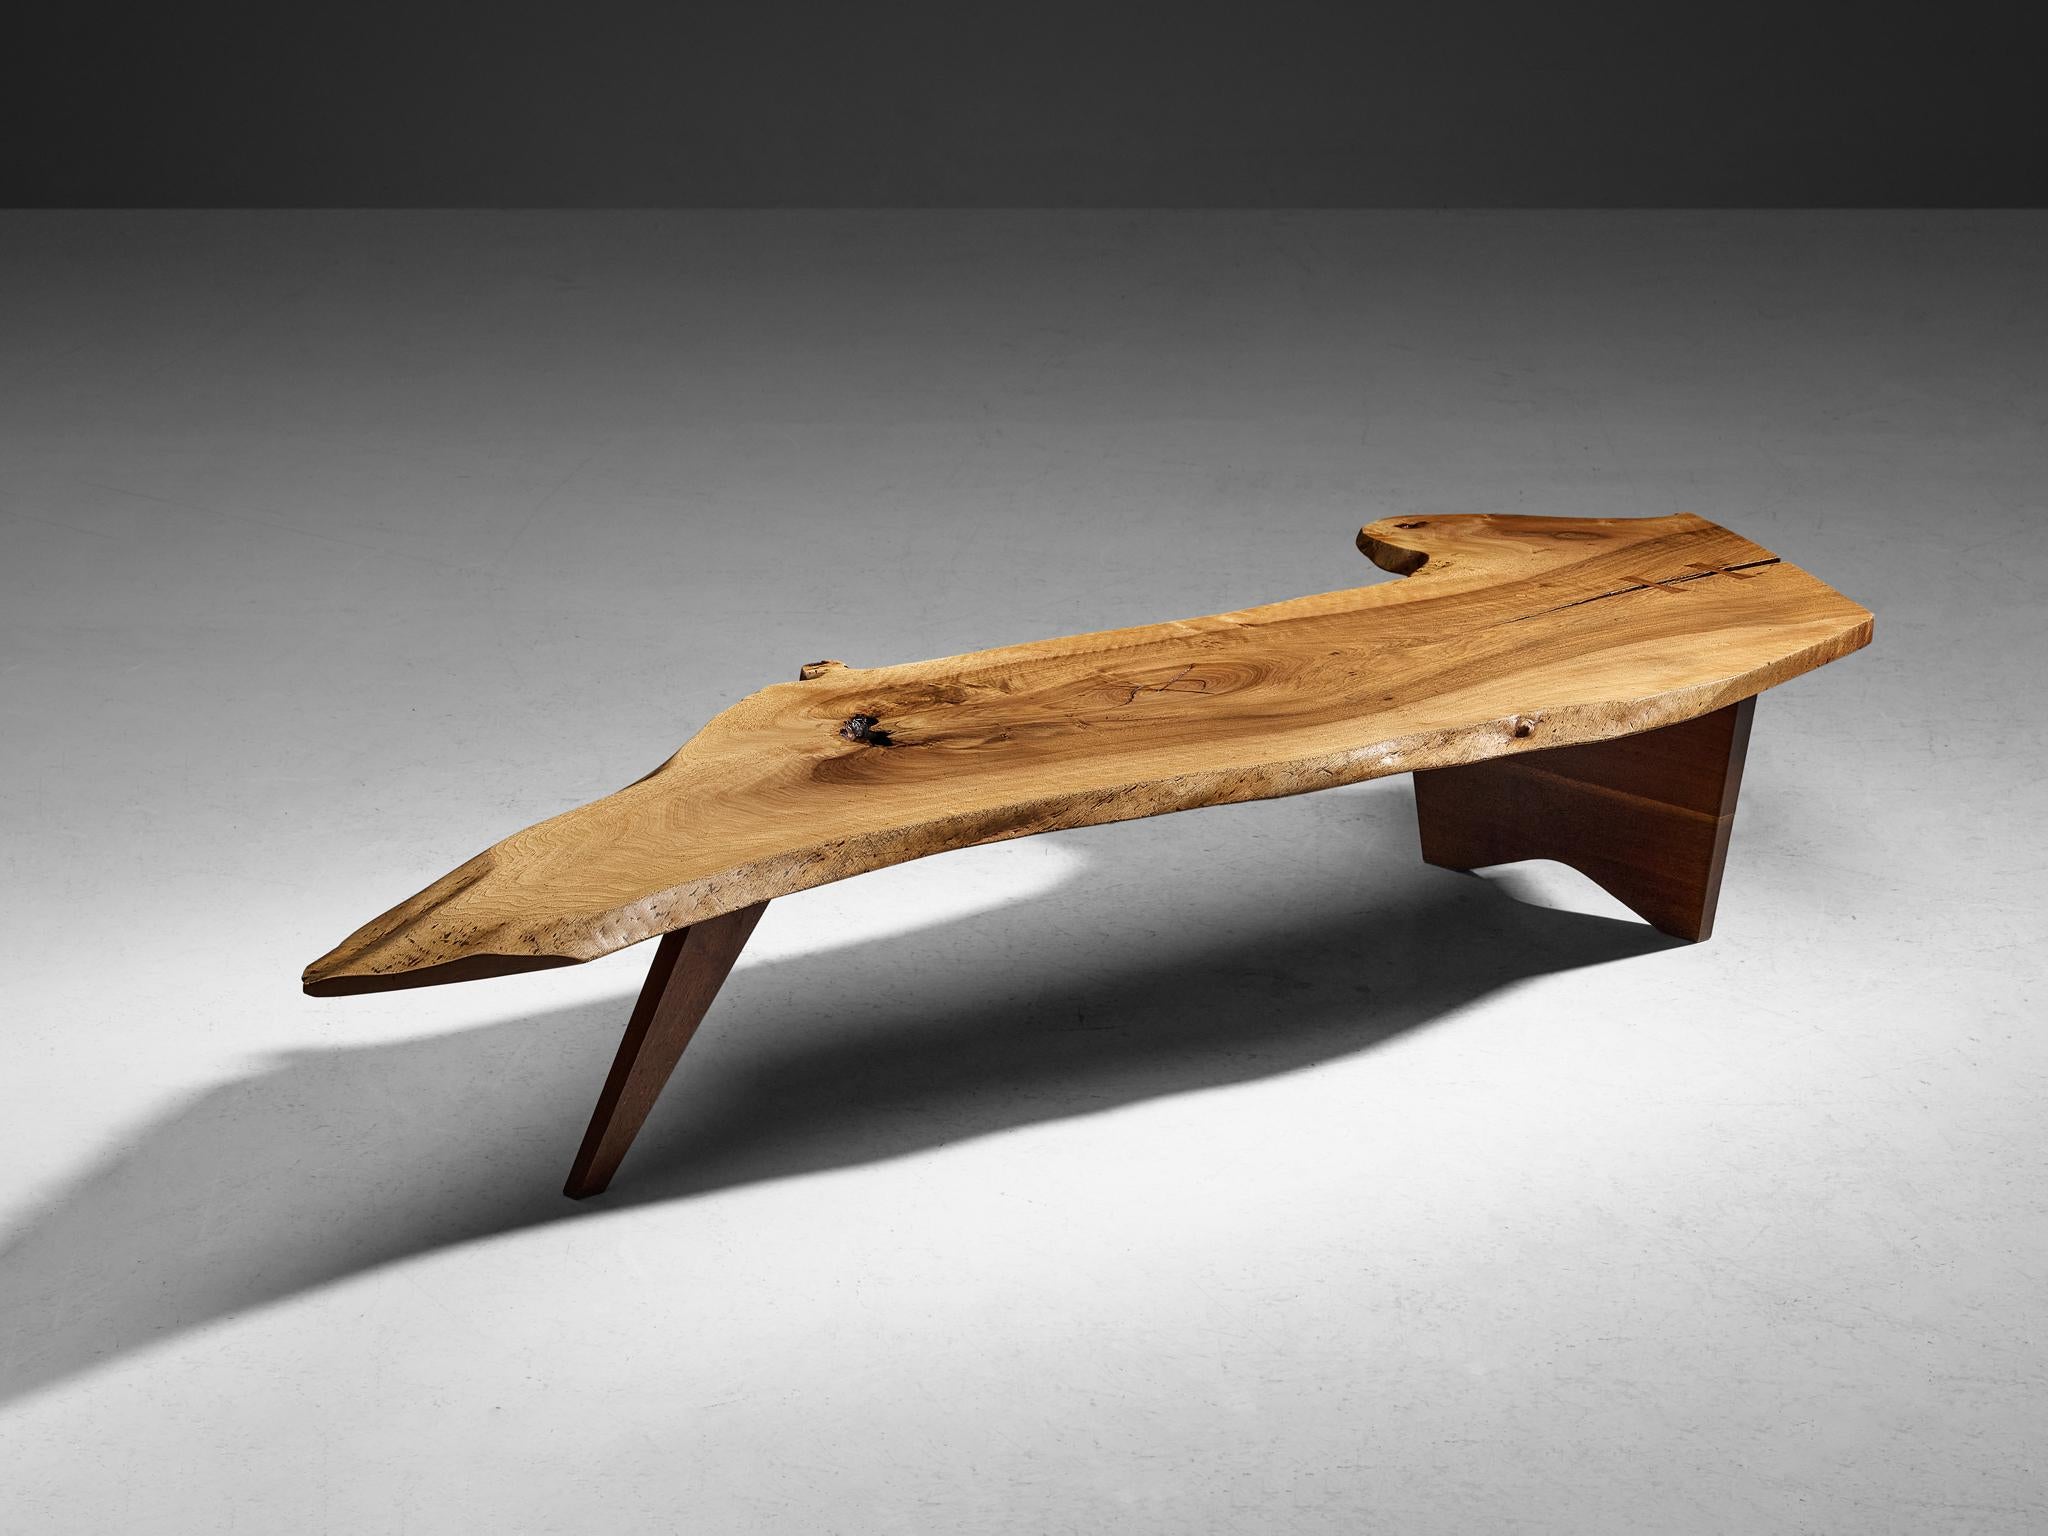 George Nakashima, free edge slab coffee table, walnut, United States, 1958

American woodworker and designer George Nakashima proves with this quintessential table that he is a true master of his craft. The impressive coffee table, created custom